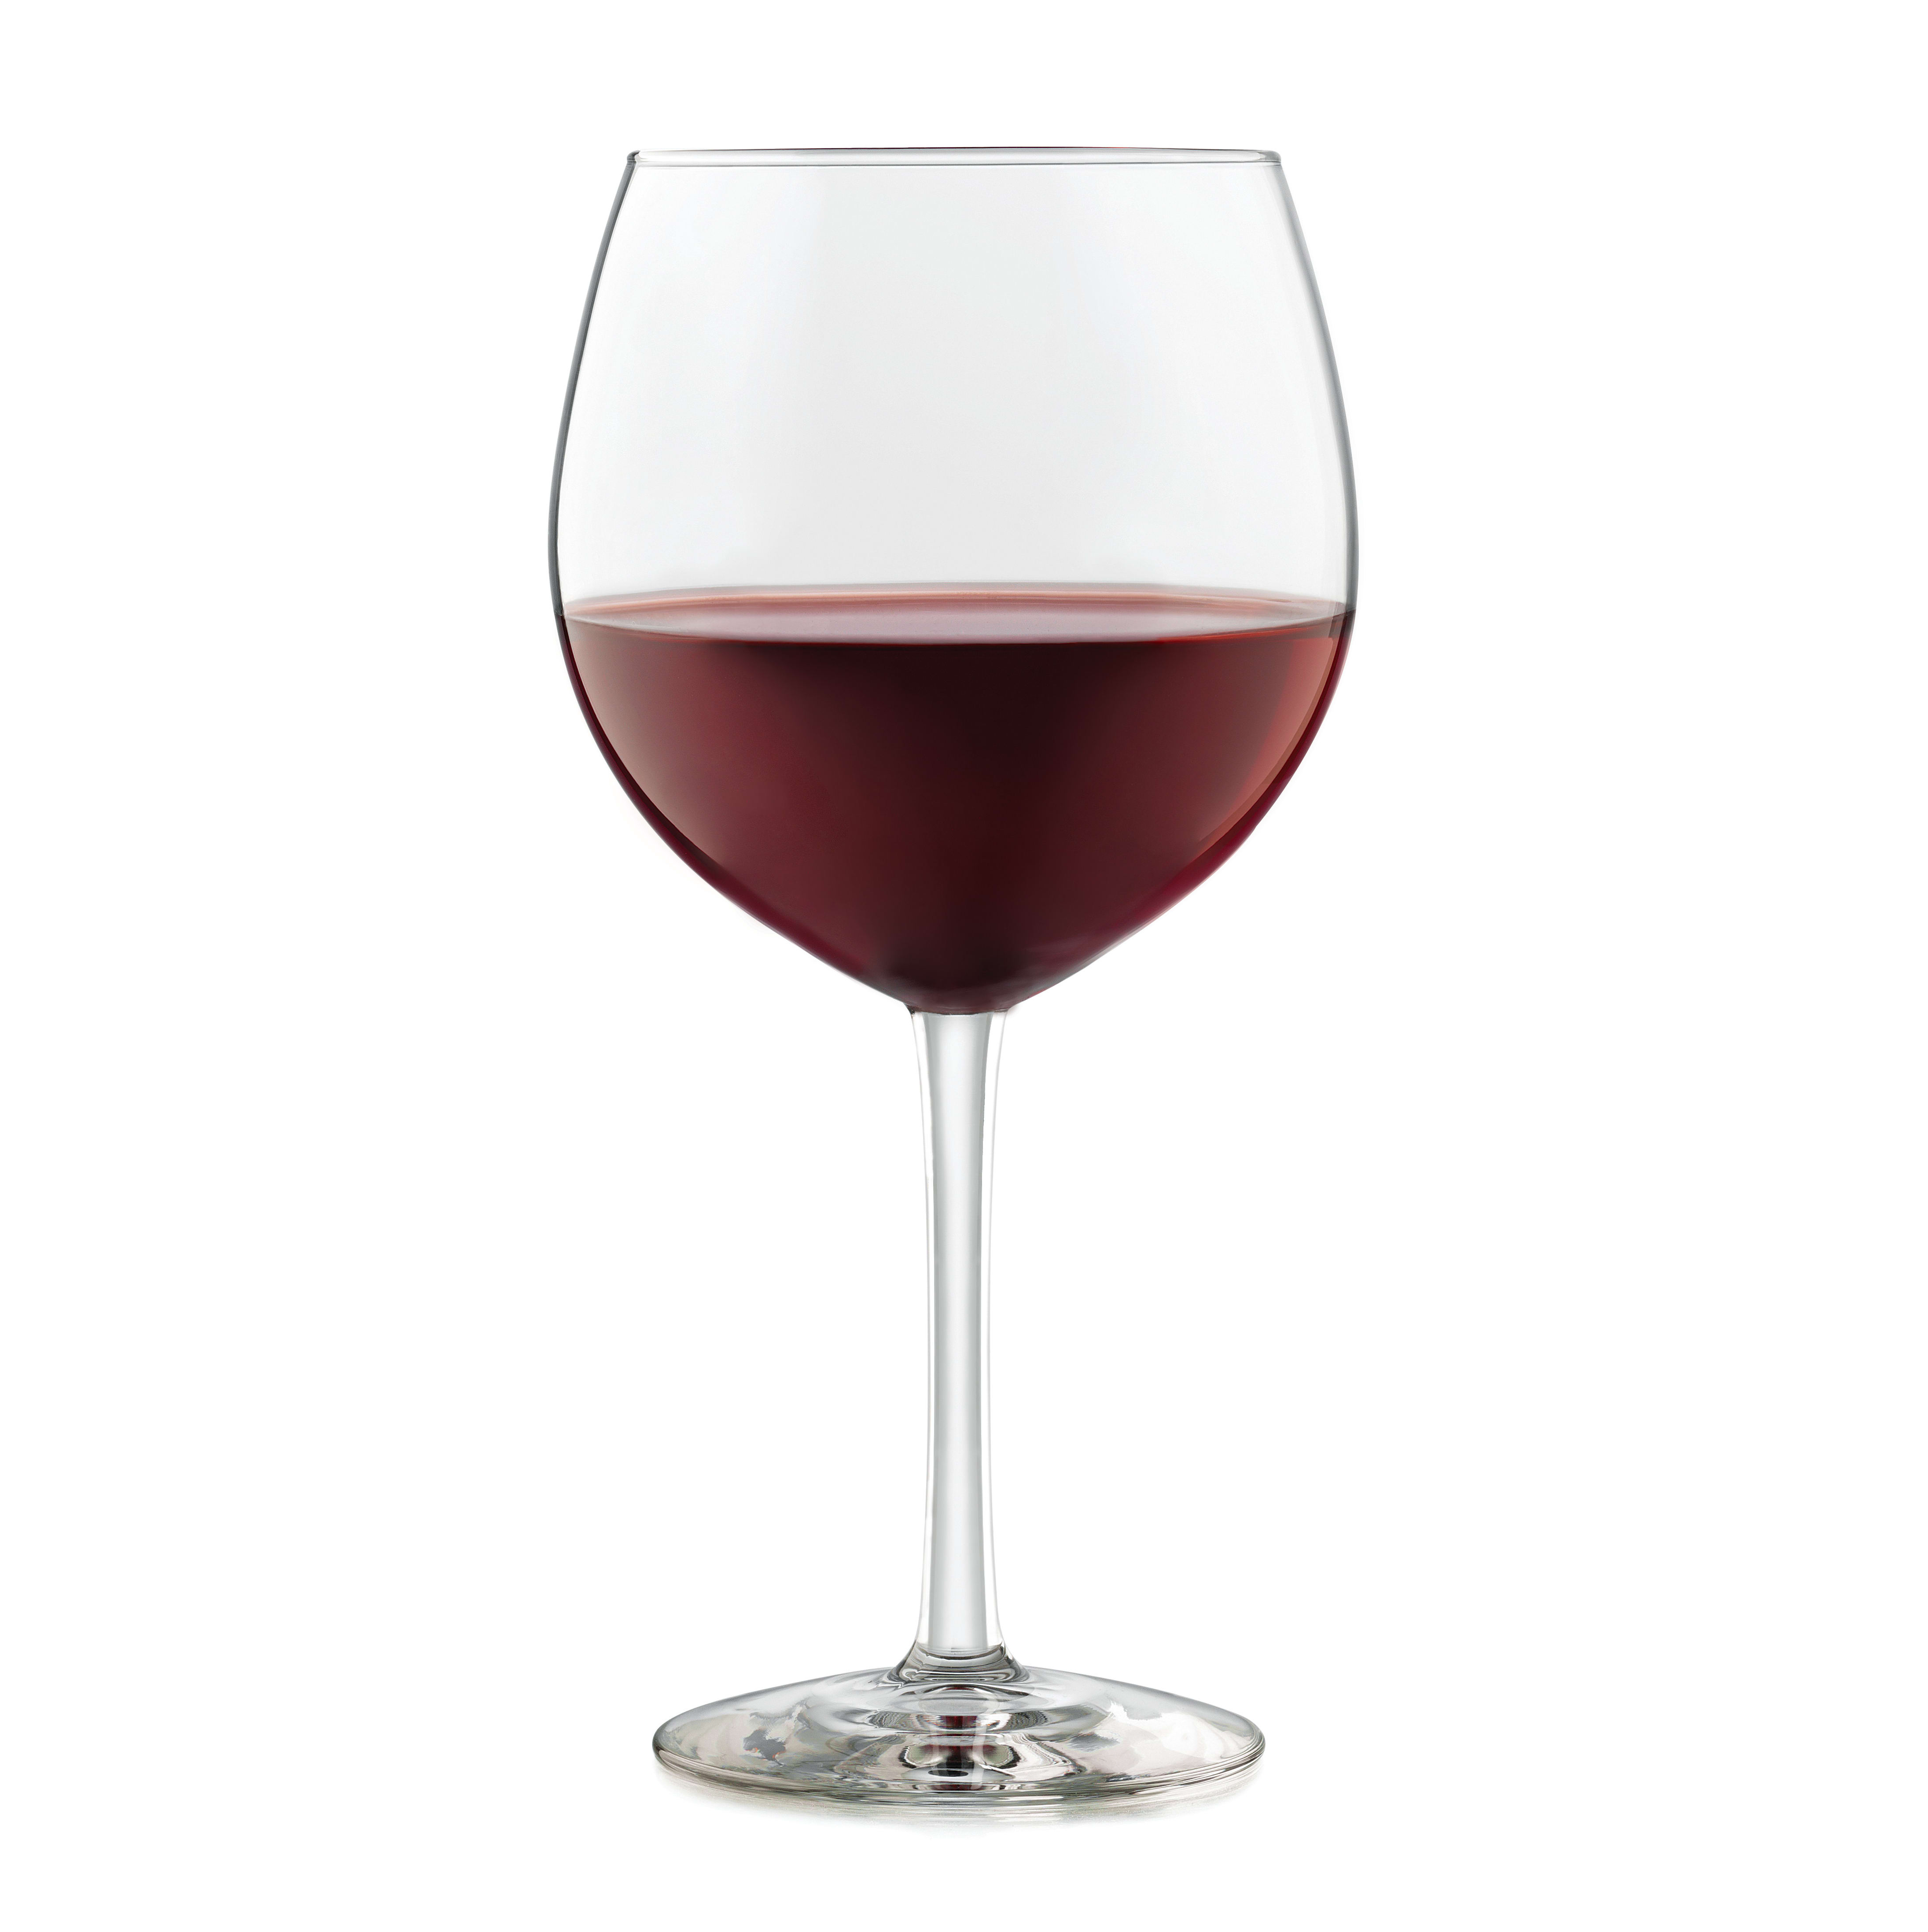 Libbey Midtown Red Wine Glasses, 18.25-ounce, Set of 8 - image 1 of 3